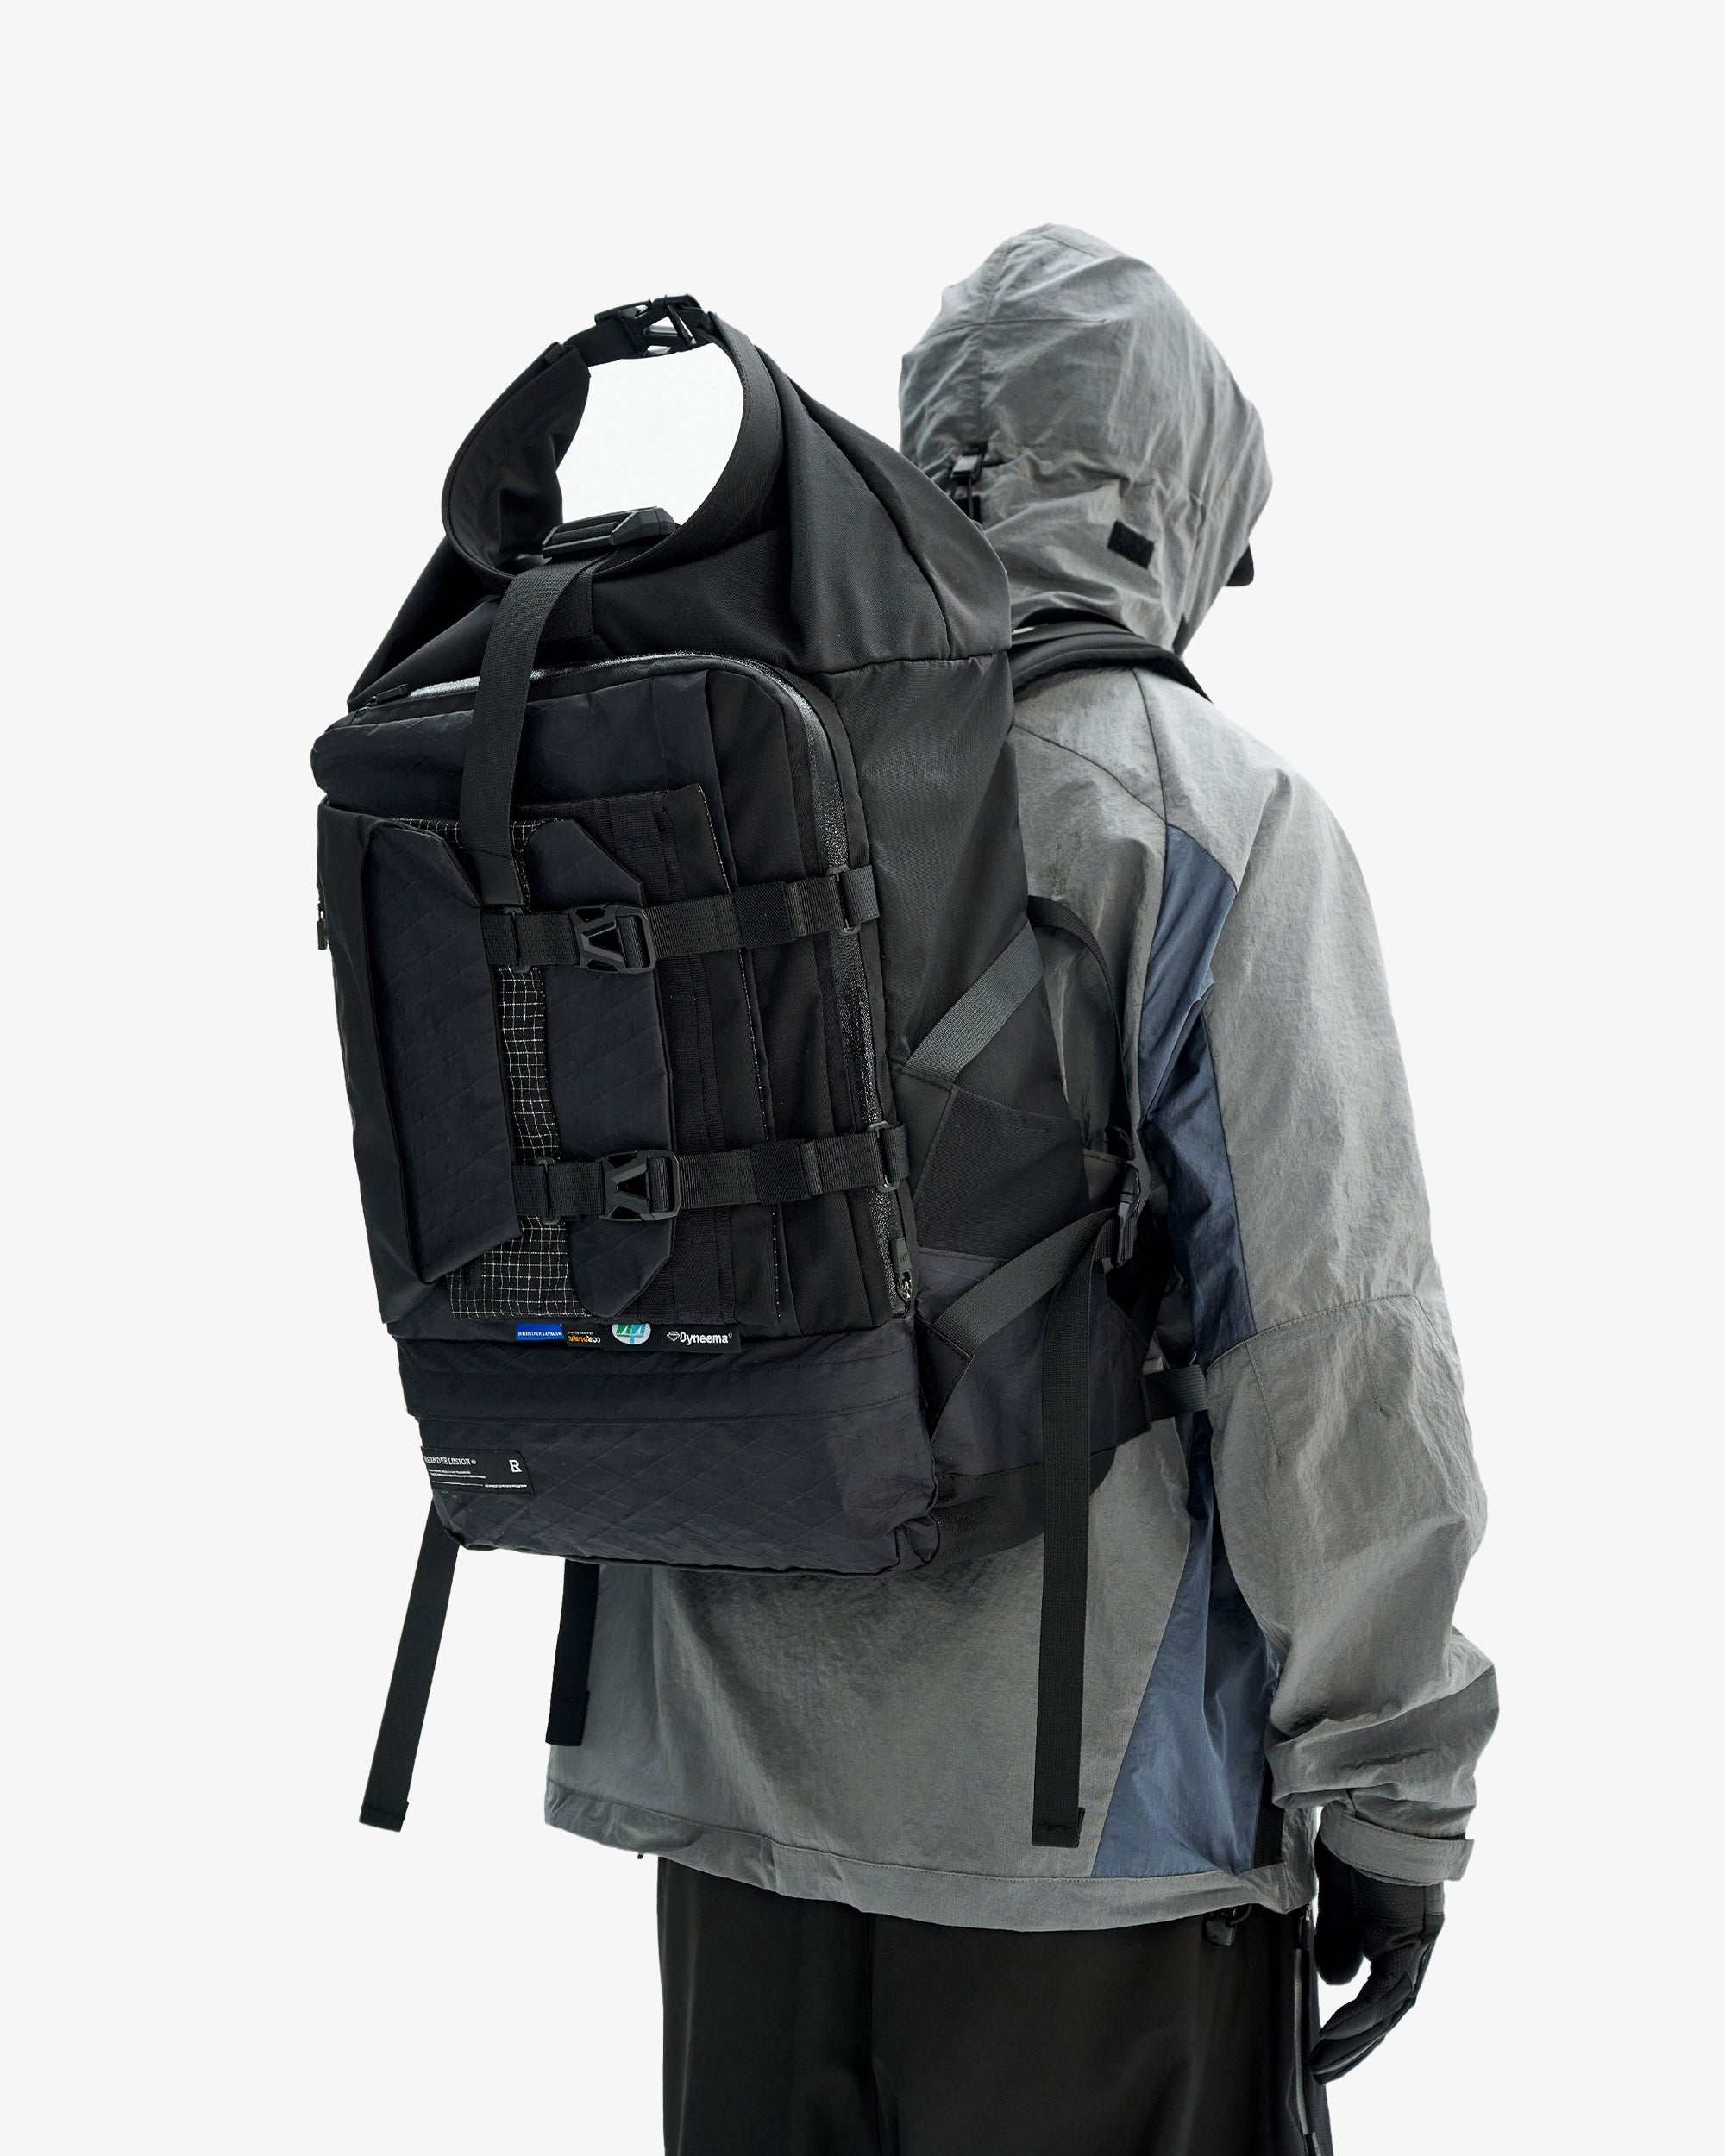 2-in-1 Ultimate Modular Expanding Backpack 2.0